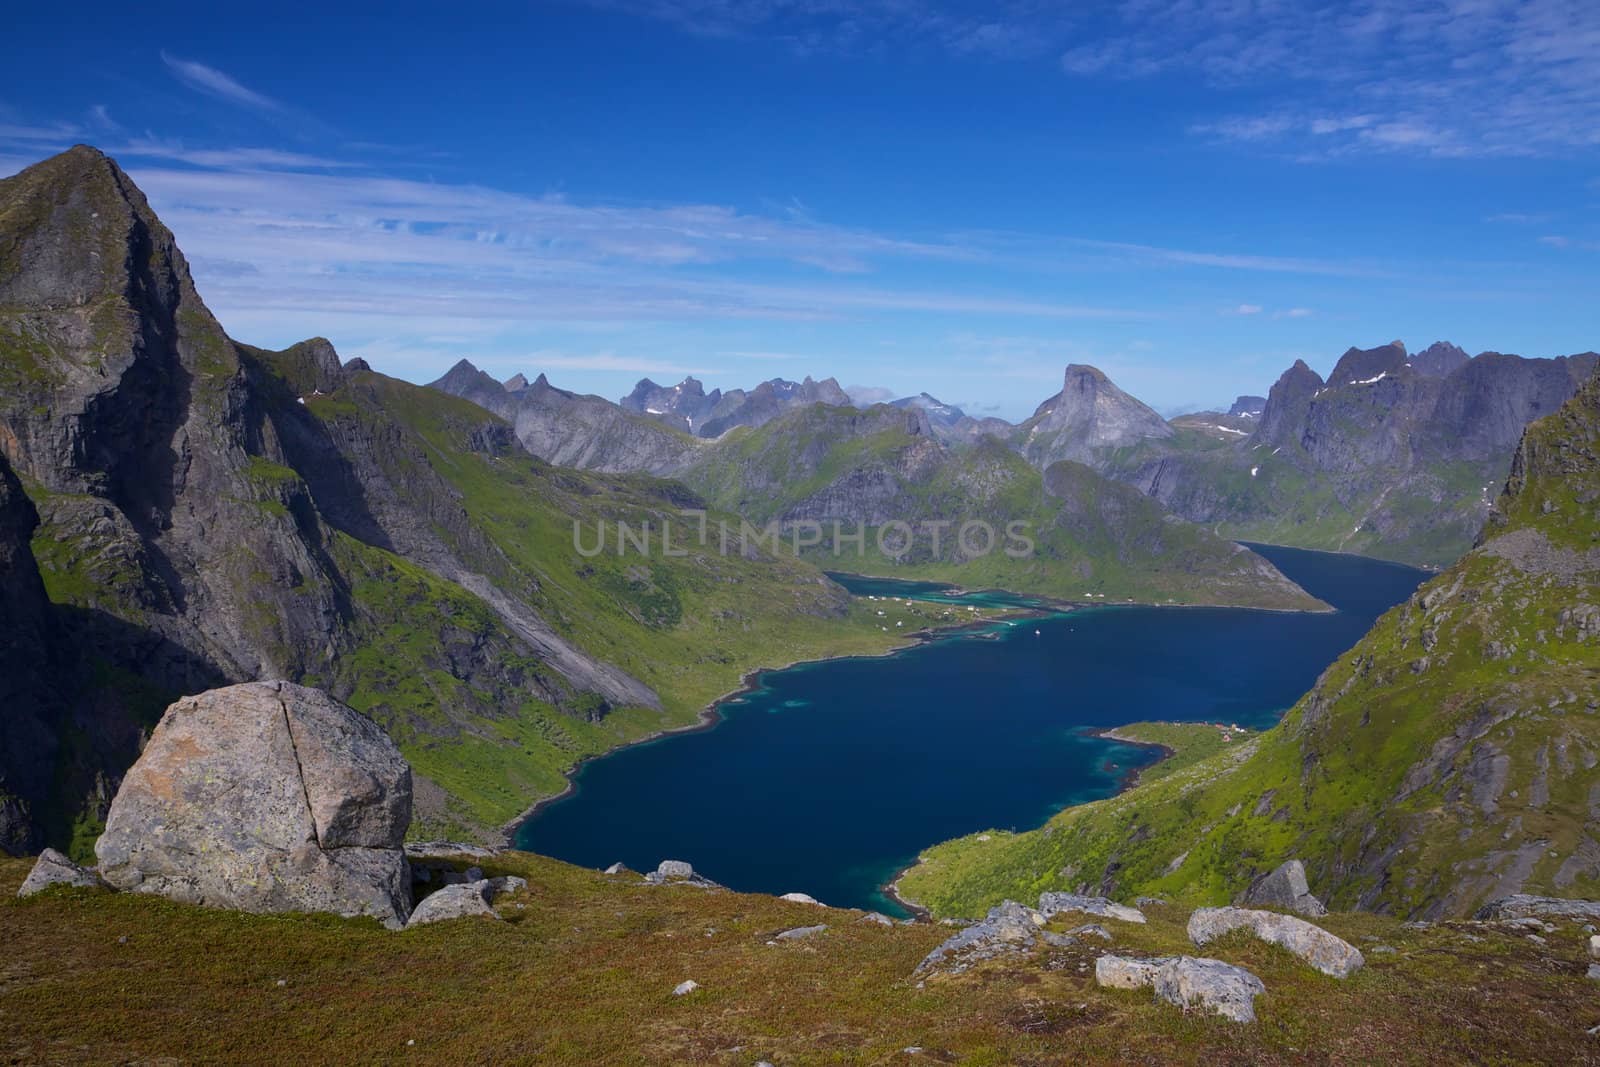 Scenic view of fjord on Lofoten Islands in Norway with dramatic mountain peaks towering above the sea